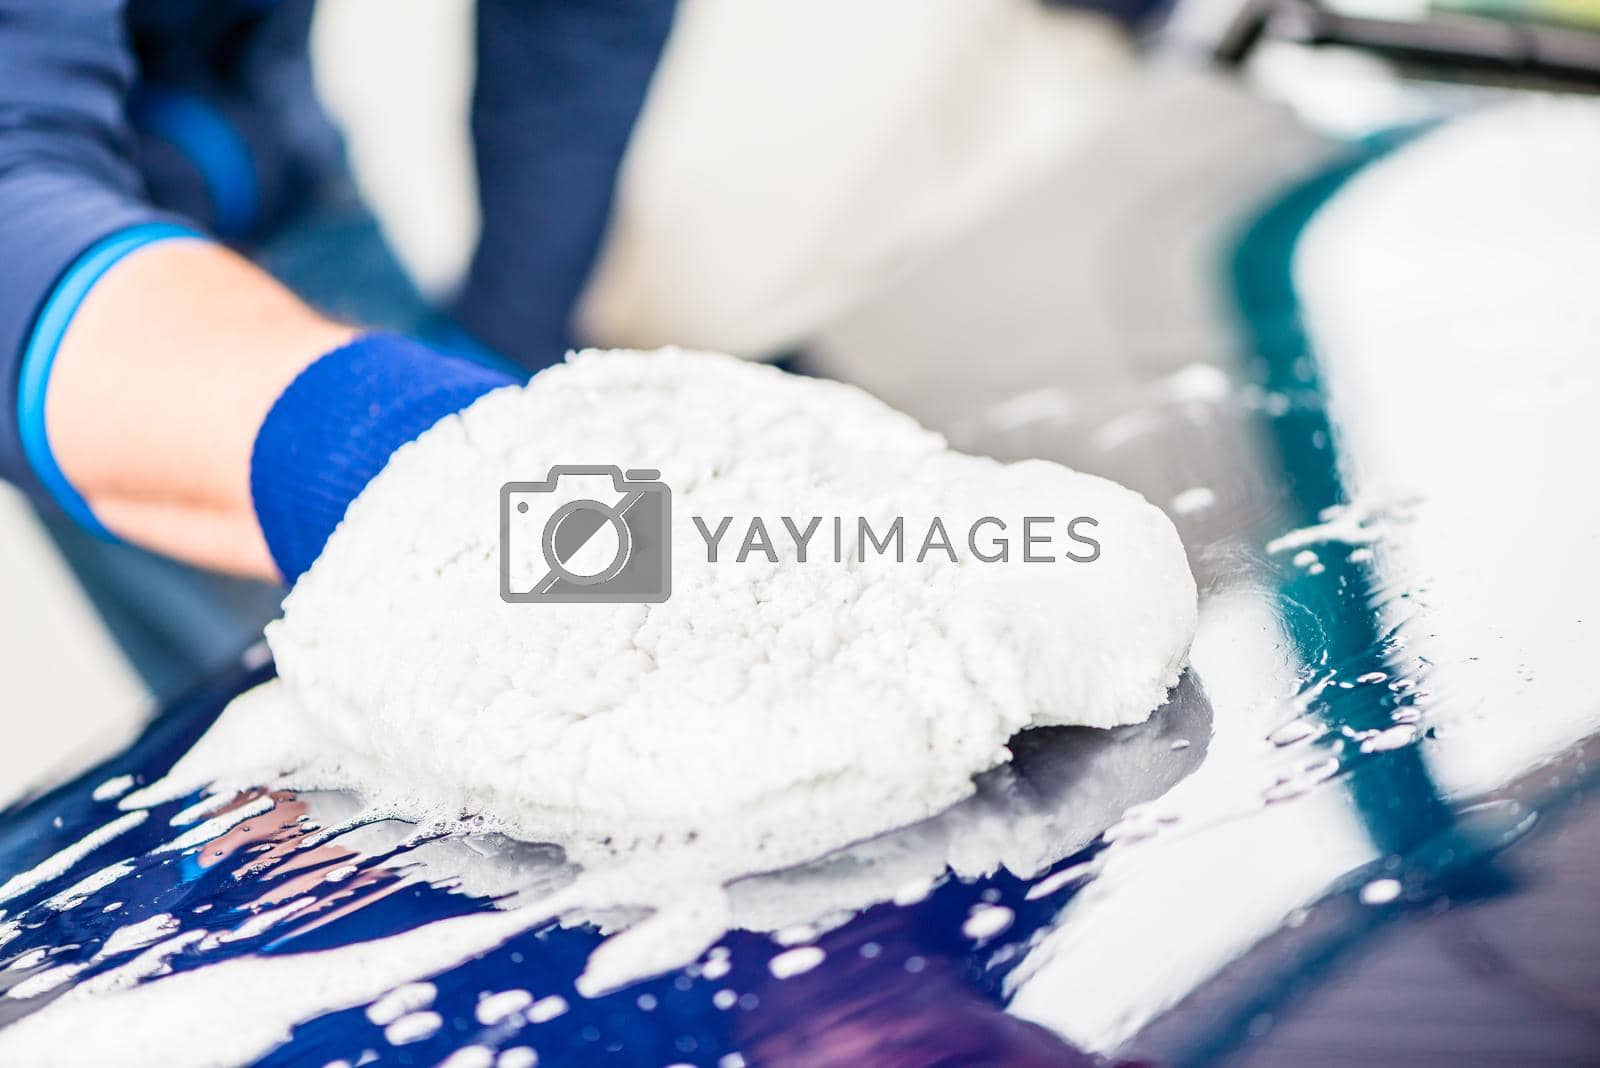 Royalty free image of Close-up of hand wiping car with microfiber wash mitt by Kzenon